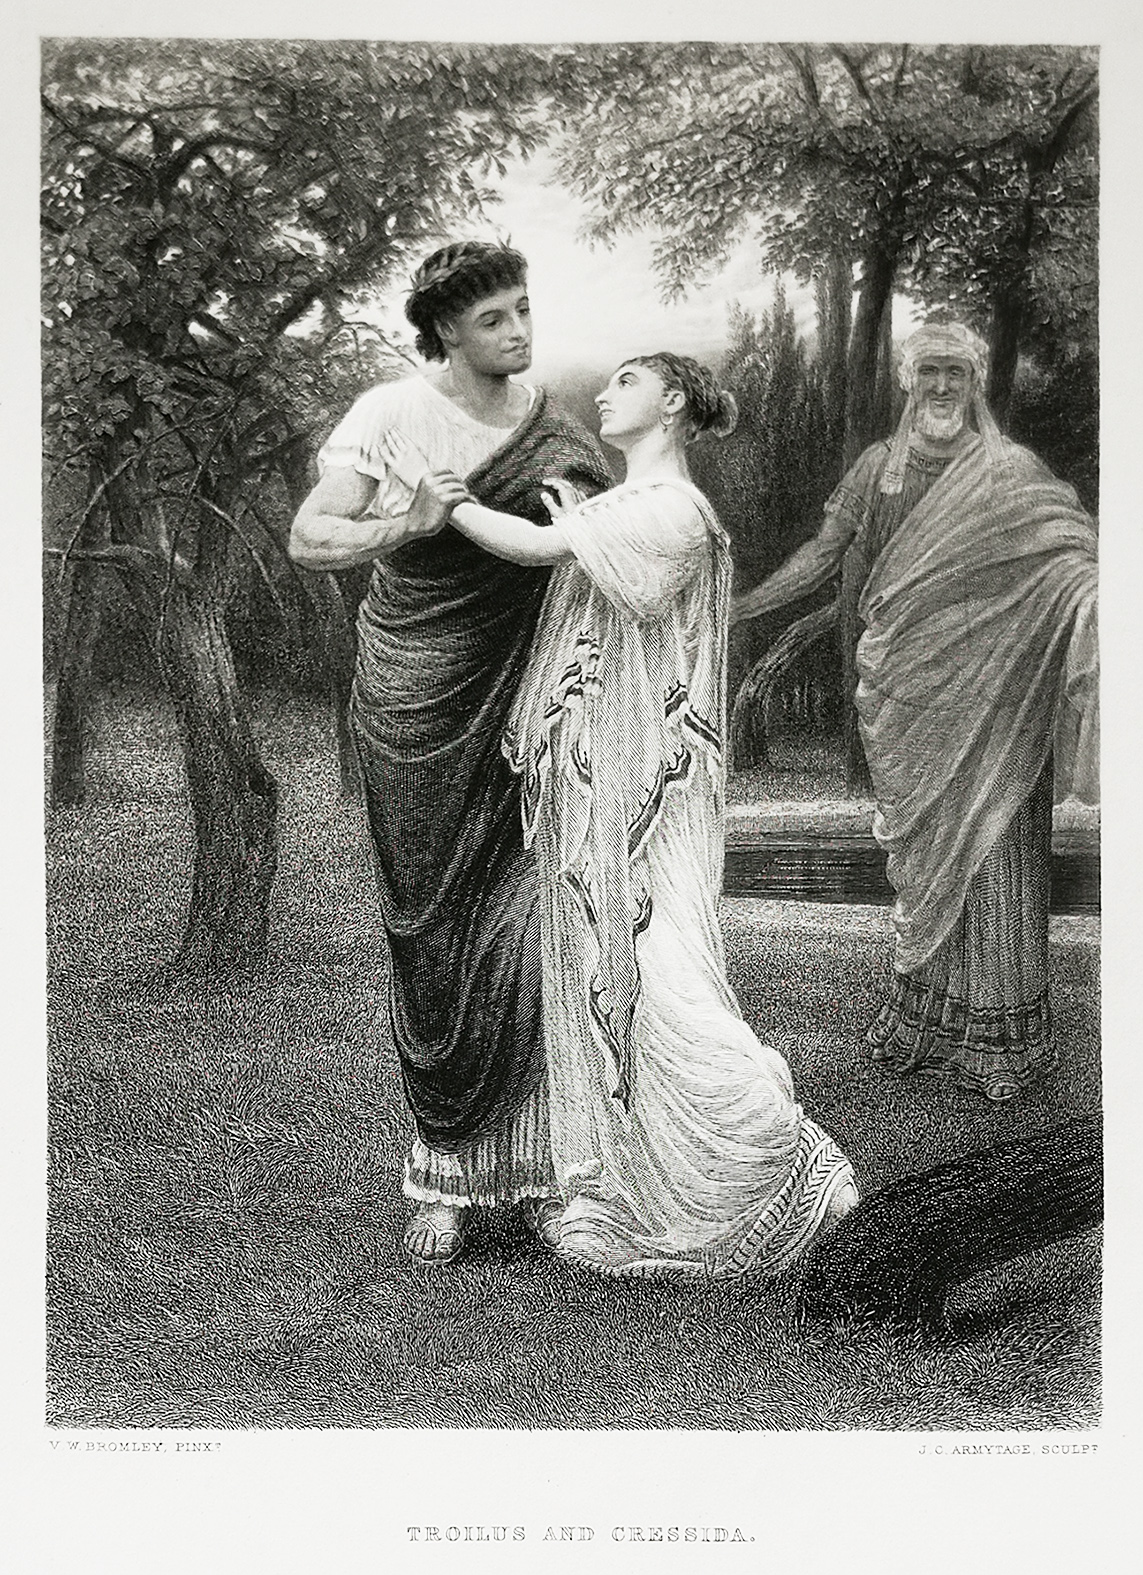 Troilus and Cressida. - Antique Print from 1874